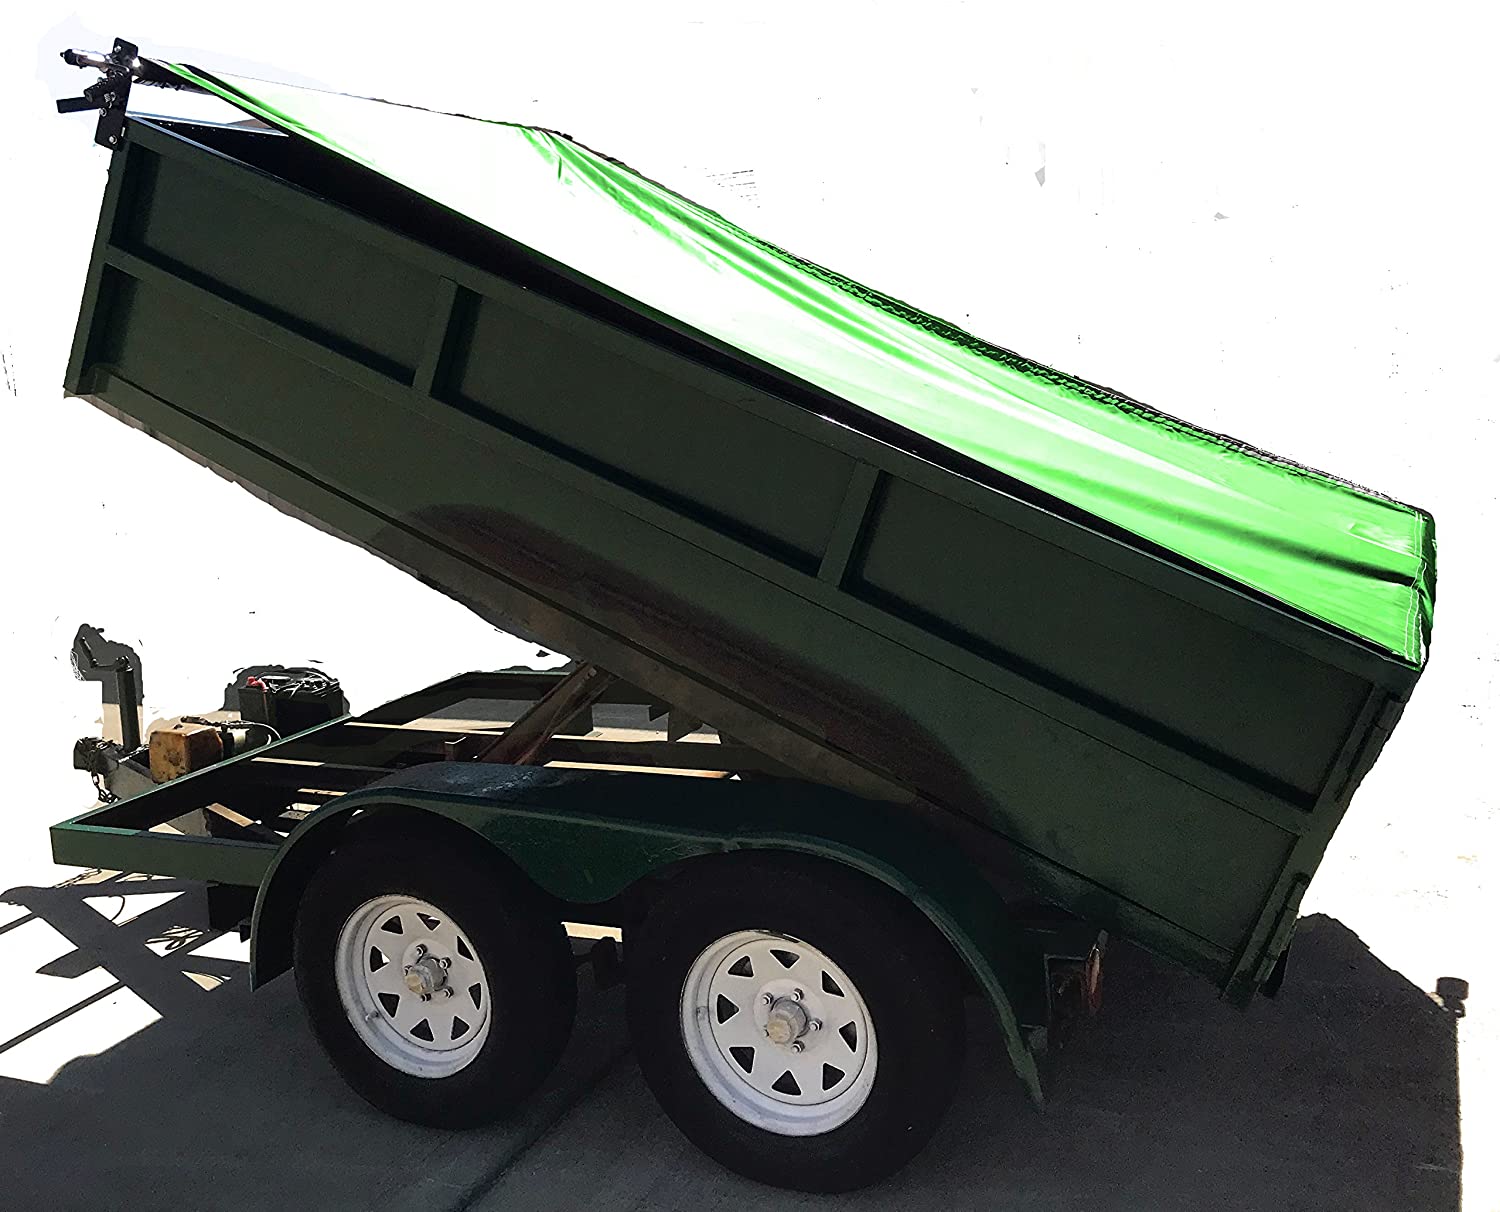 A Tarp Roller kit for Dump Beds, Trailers, or truck beds, helps prevent cargo from being blown away.